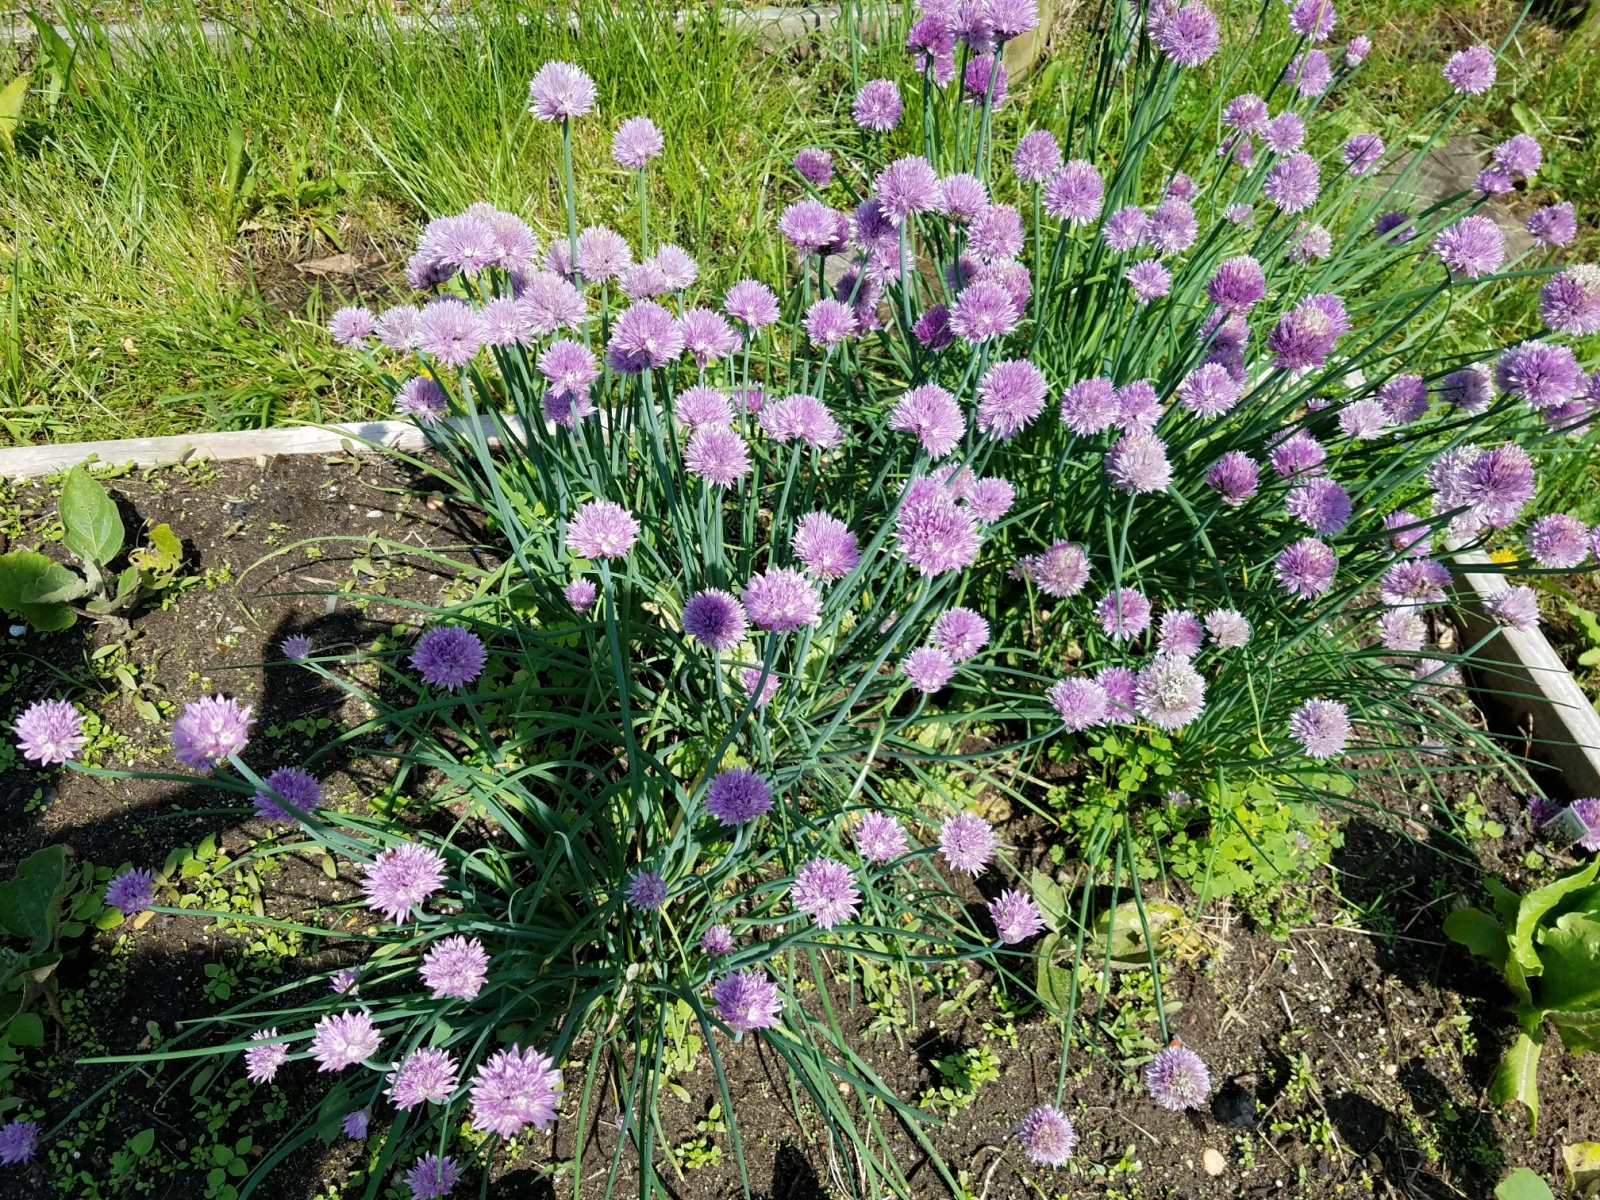 “My chives were treated 2x with Blue Gold™ and are the largest they have ever been, and it’s only May with still cool temps.”